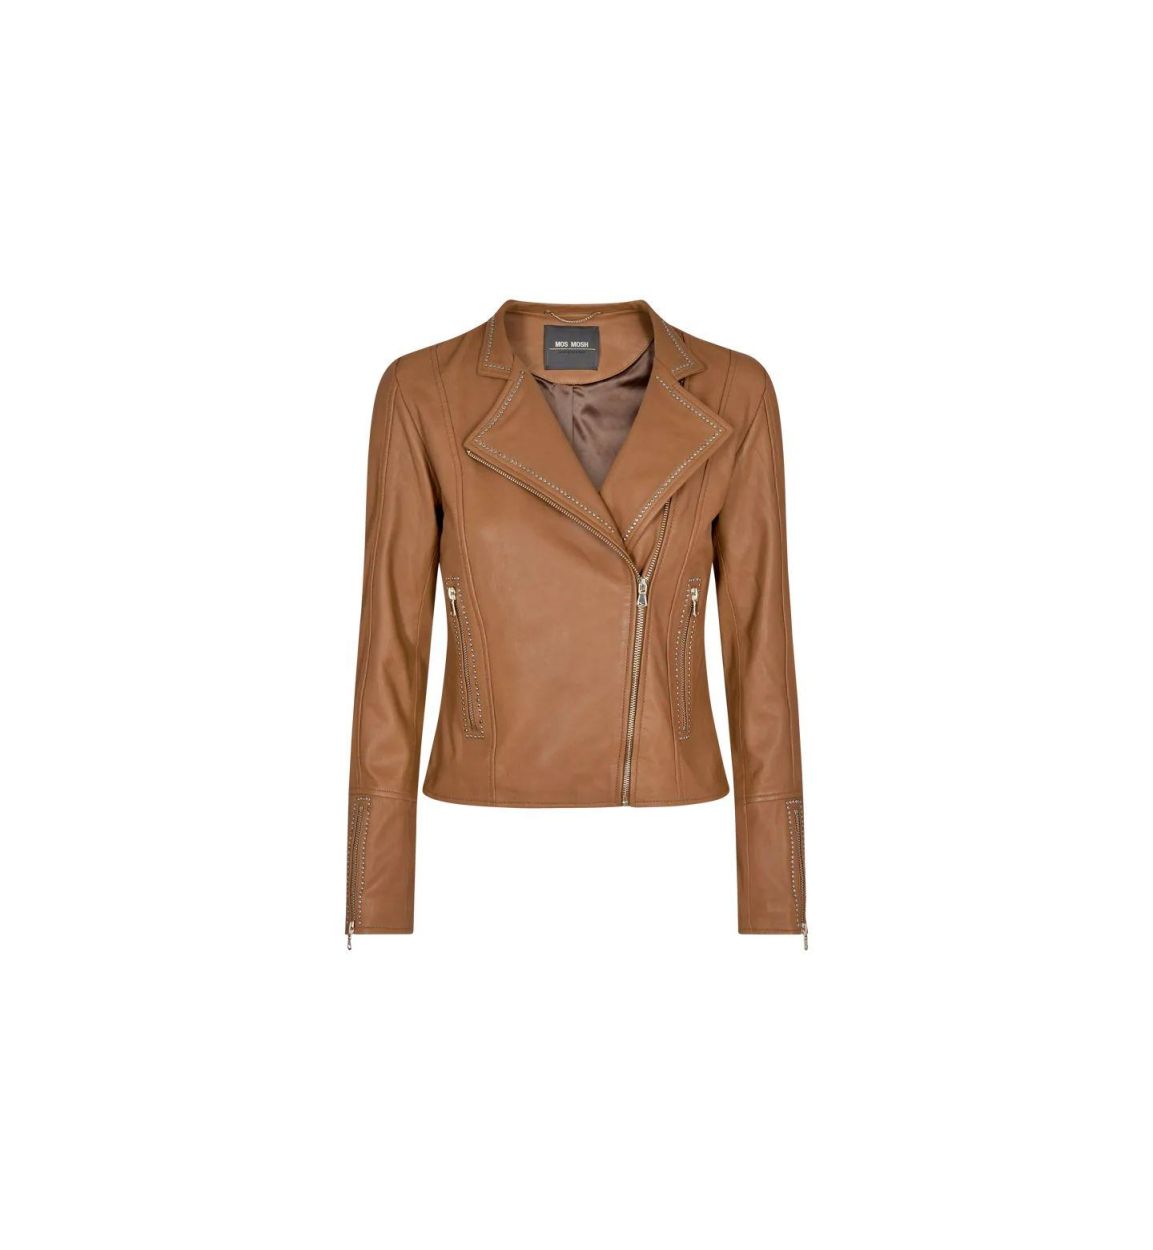 Mos Mosh Vest Camel  (146400/709) - Corylie (Roeselare)